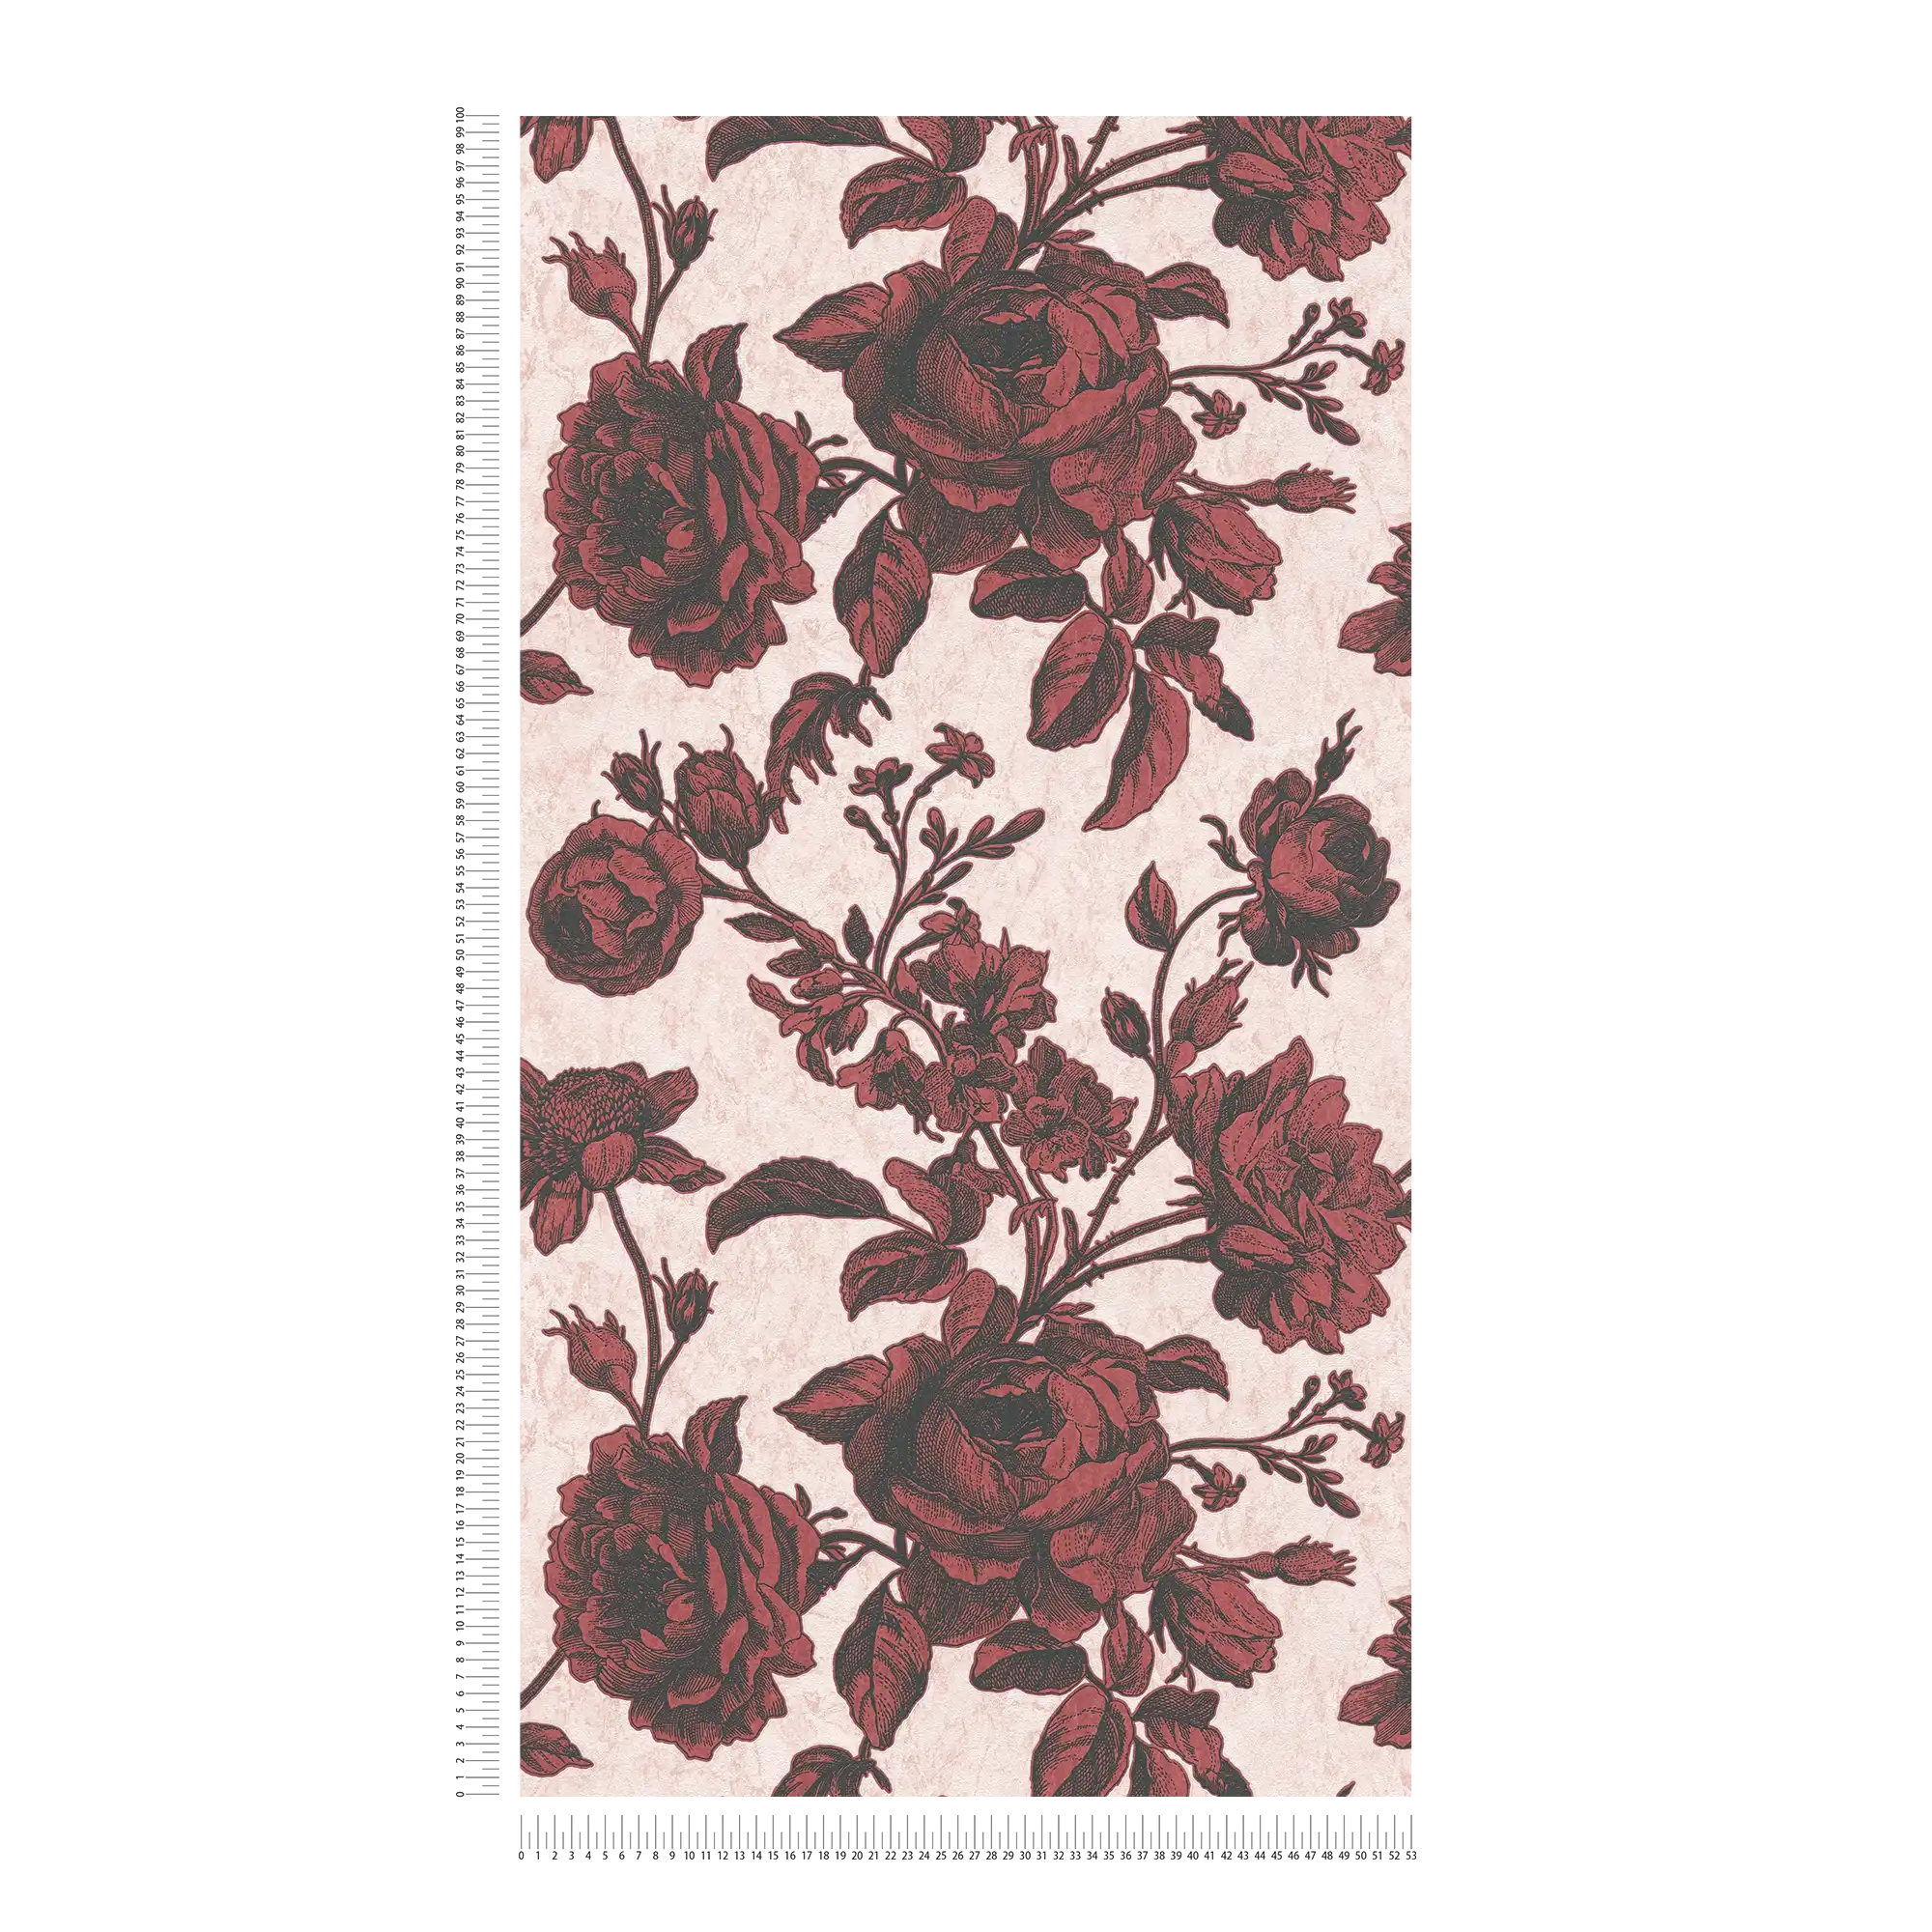             Roses wallpaper red-black in vintage sign style - pink, red
        